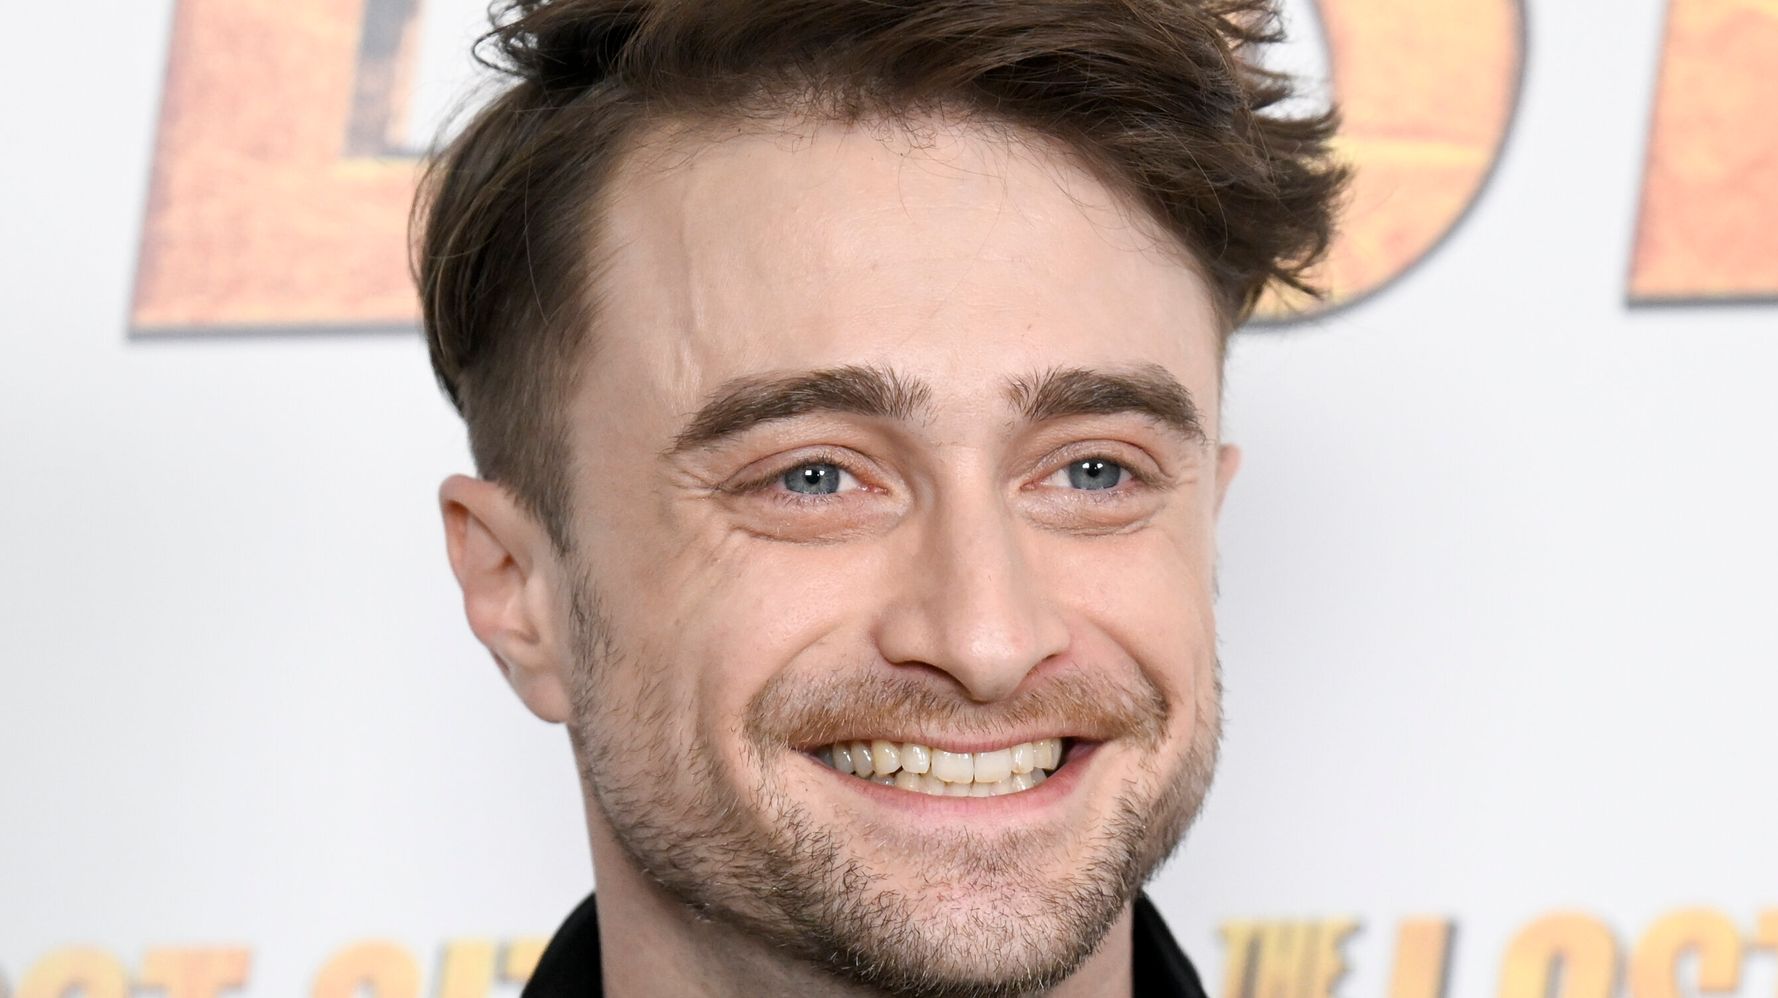 Daniel Radcliffe Is ‘Not Interested’ In Playing Harry Potter In ‘Cursed Child’ Film